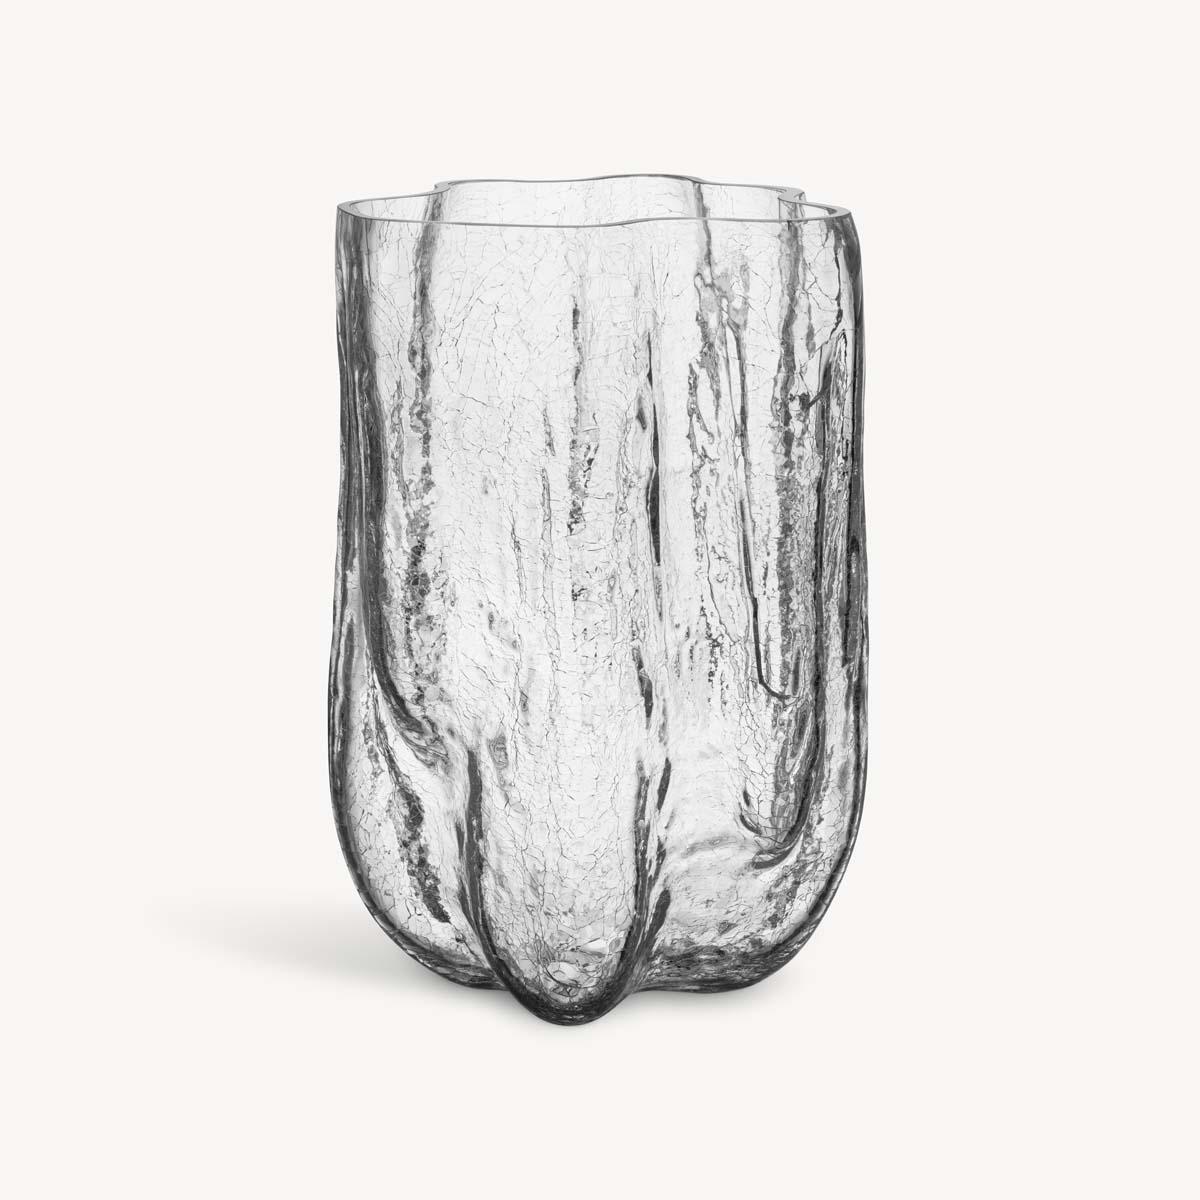 Crackle and thunder – a magical wonder! At Kosta Boda, we marvel at beautifully preserved cracks in glass. The clear glass vase from the Crackle collection has an expressive, sculptural exterior created using an old handicraft technique where the